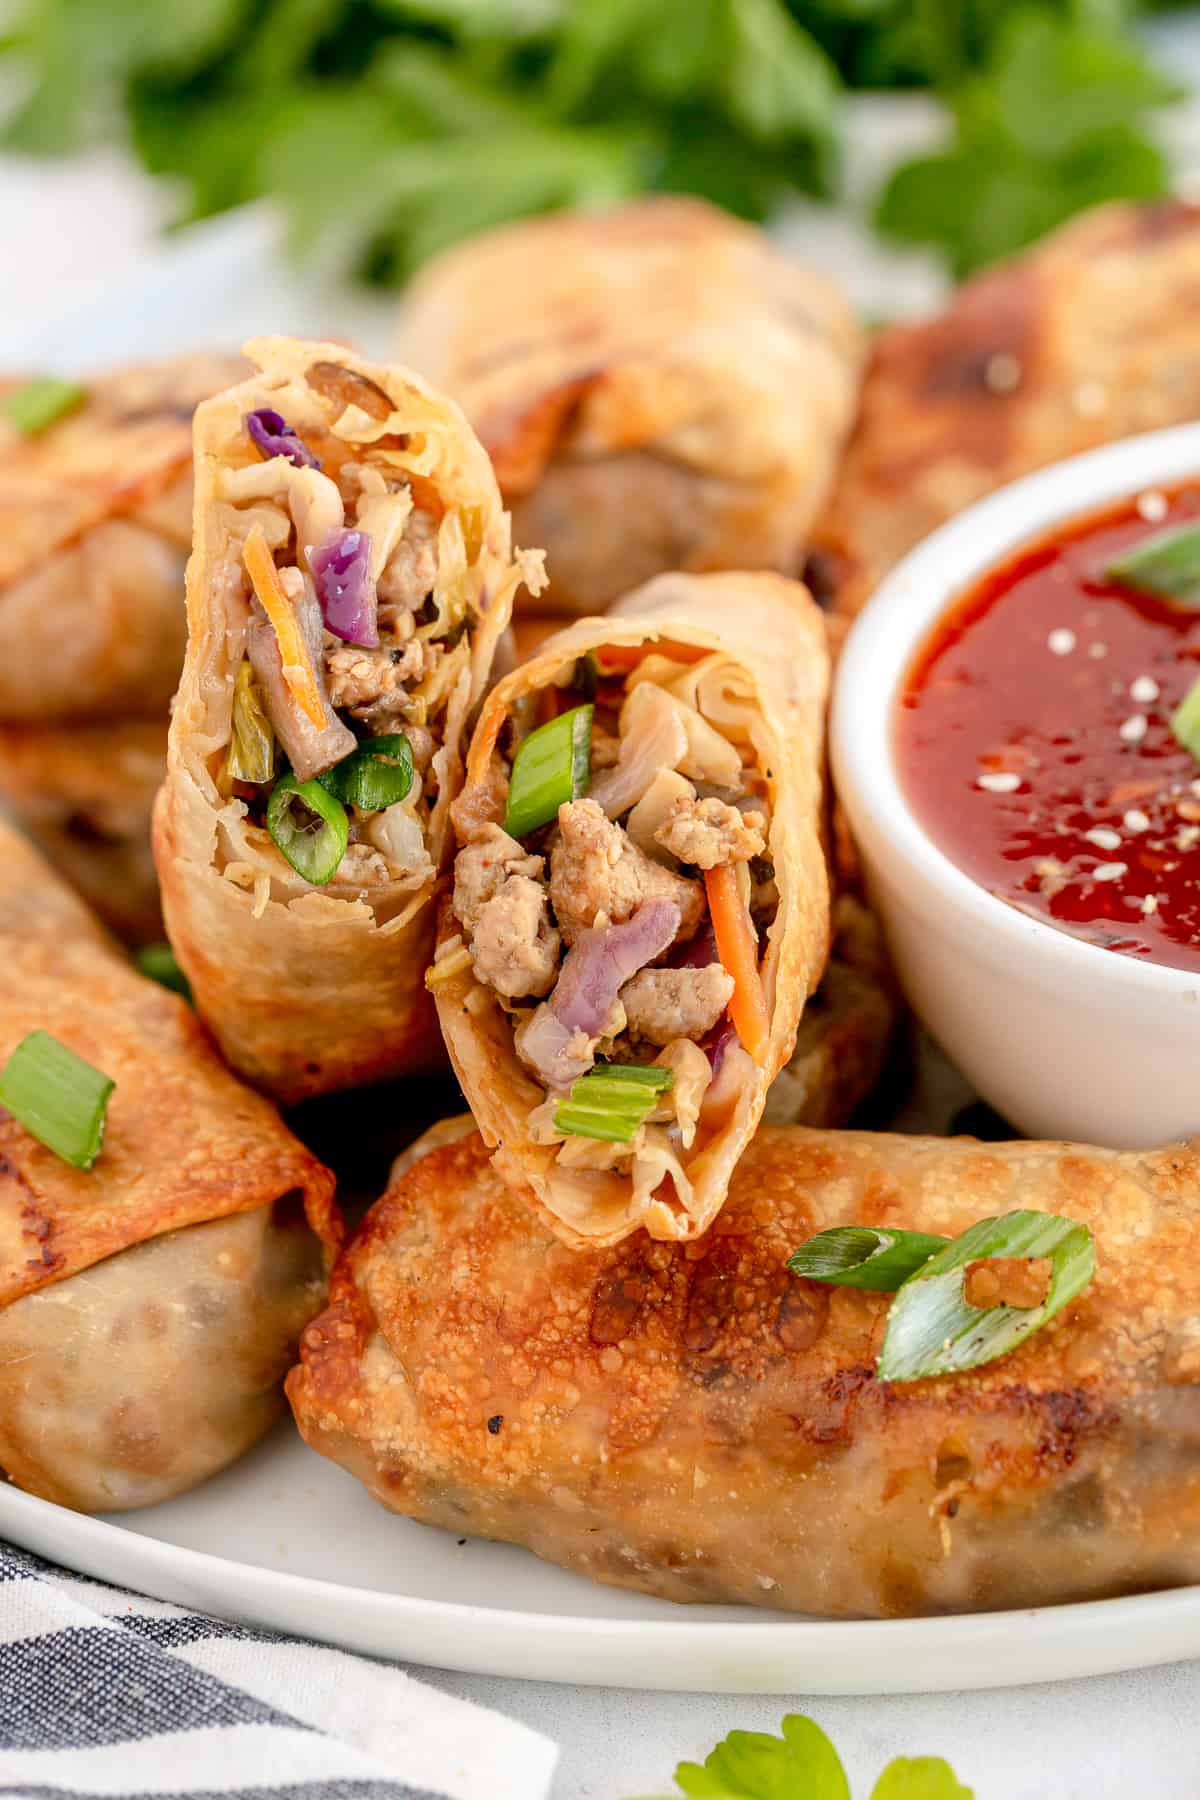 A platter of egg rolls with a small bowl of sweet chili sauce.